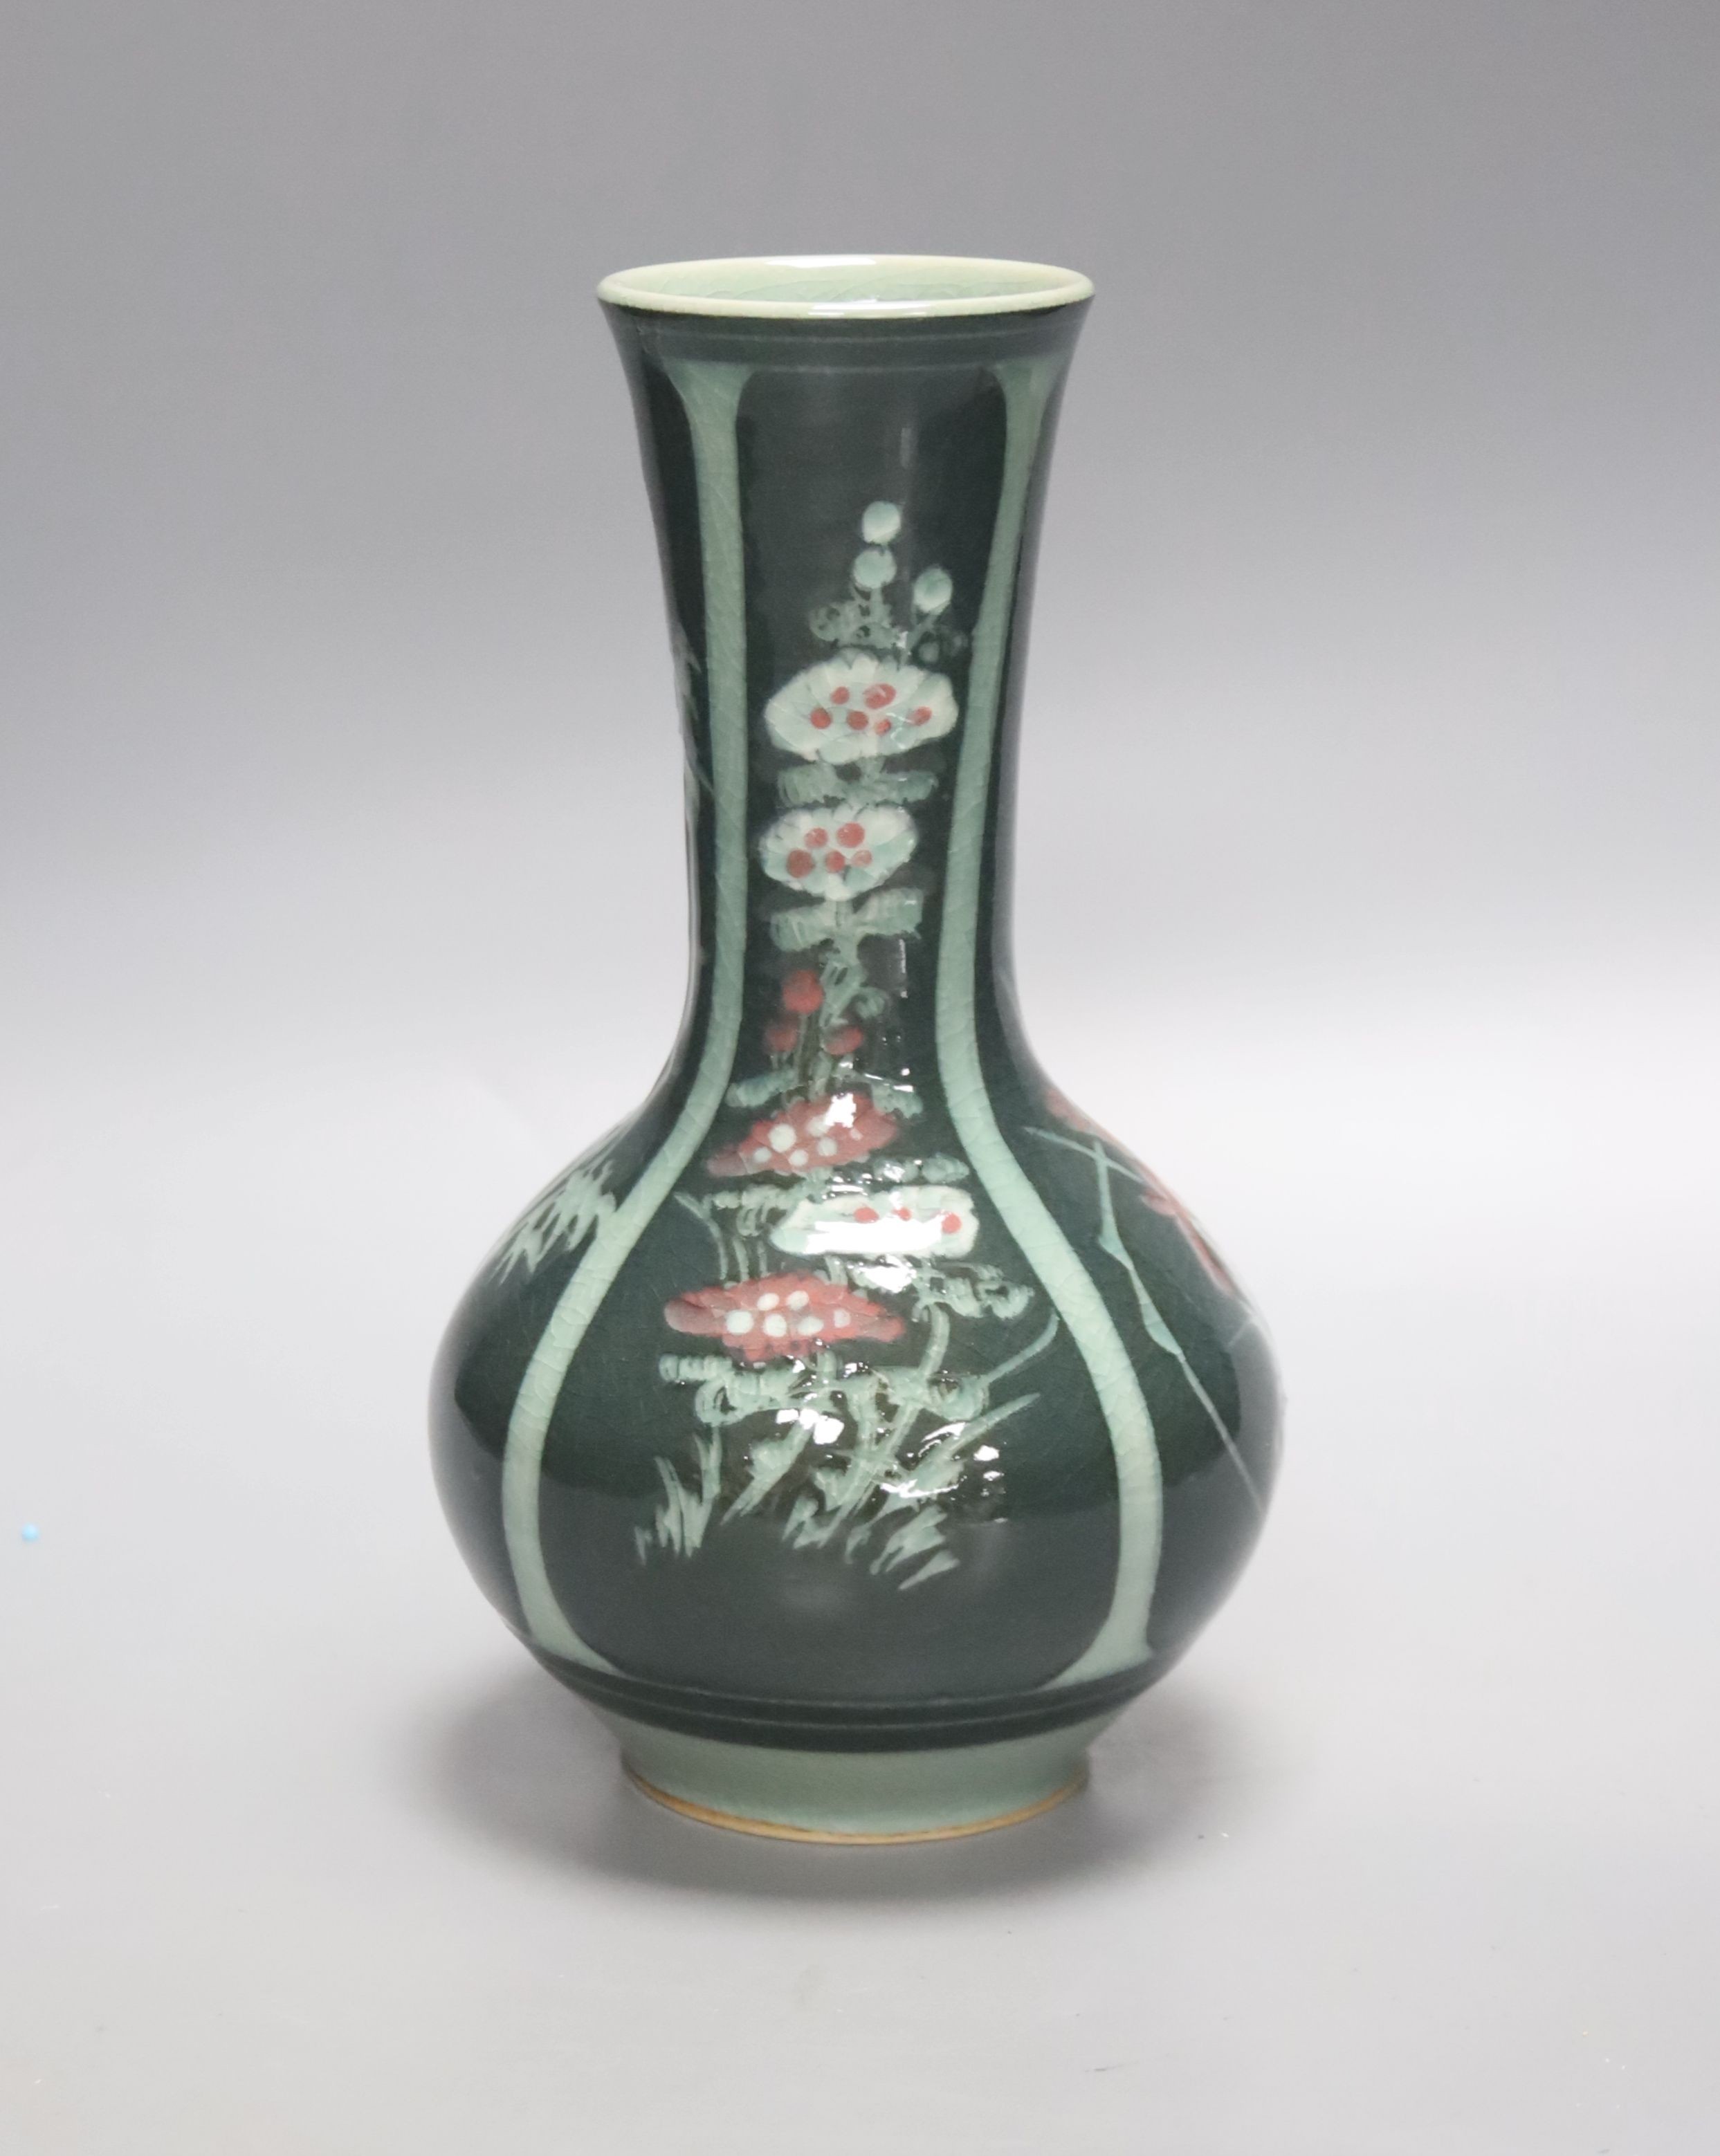 A green Japanese artisan studio vase decorated with flower designs, 20cm tall